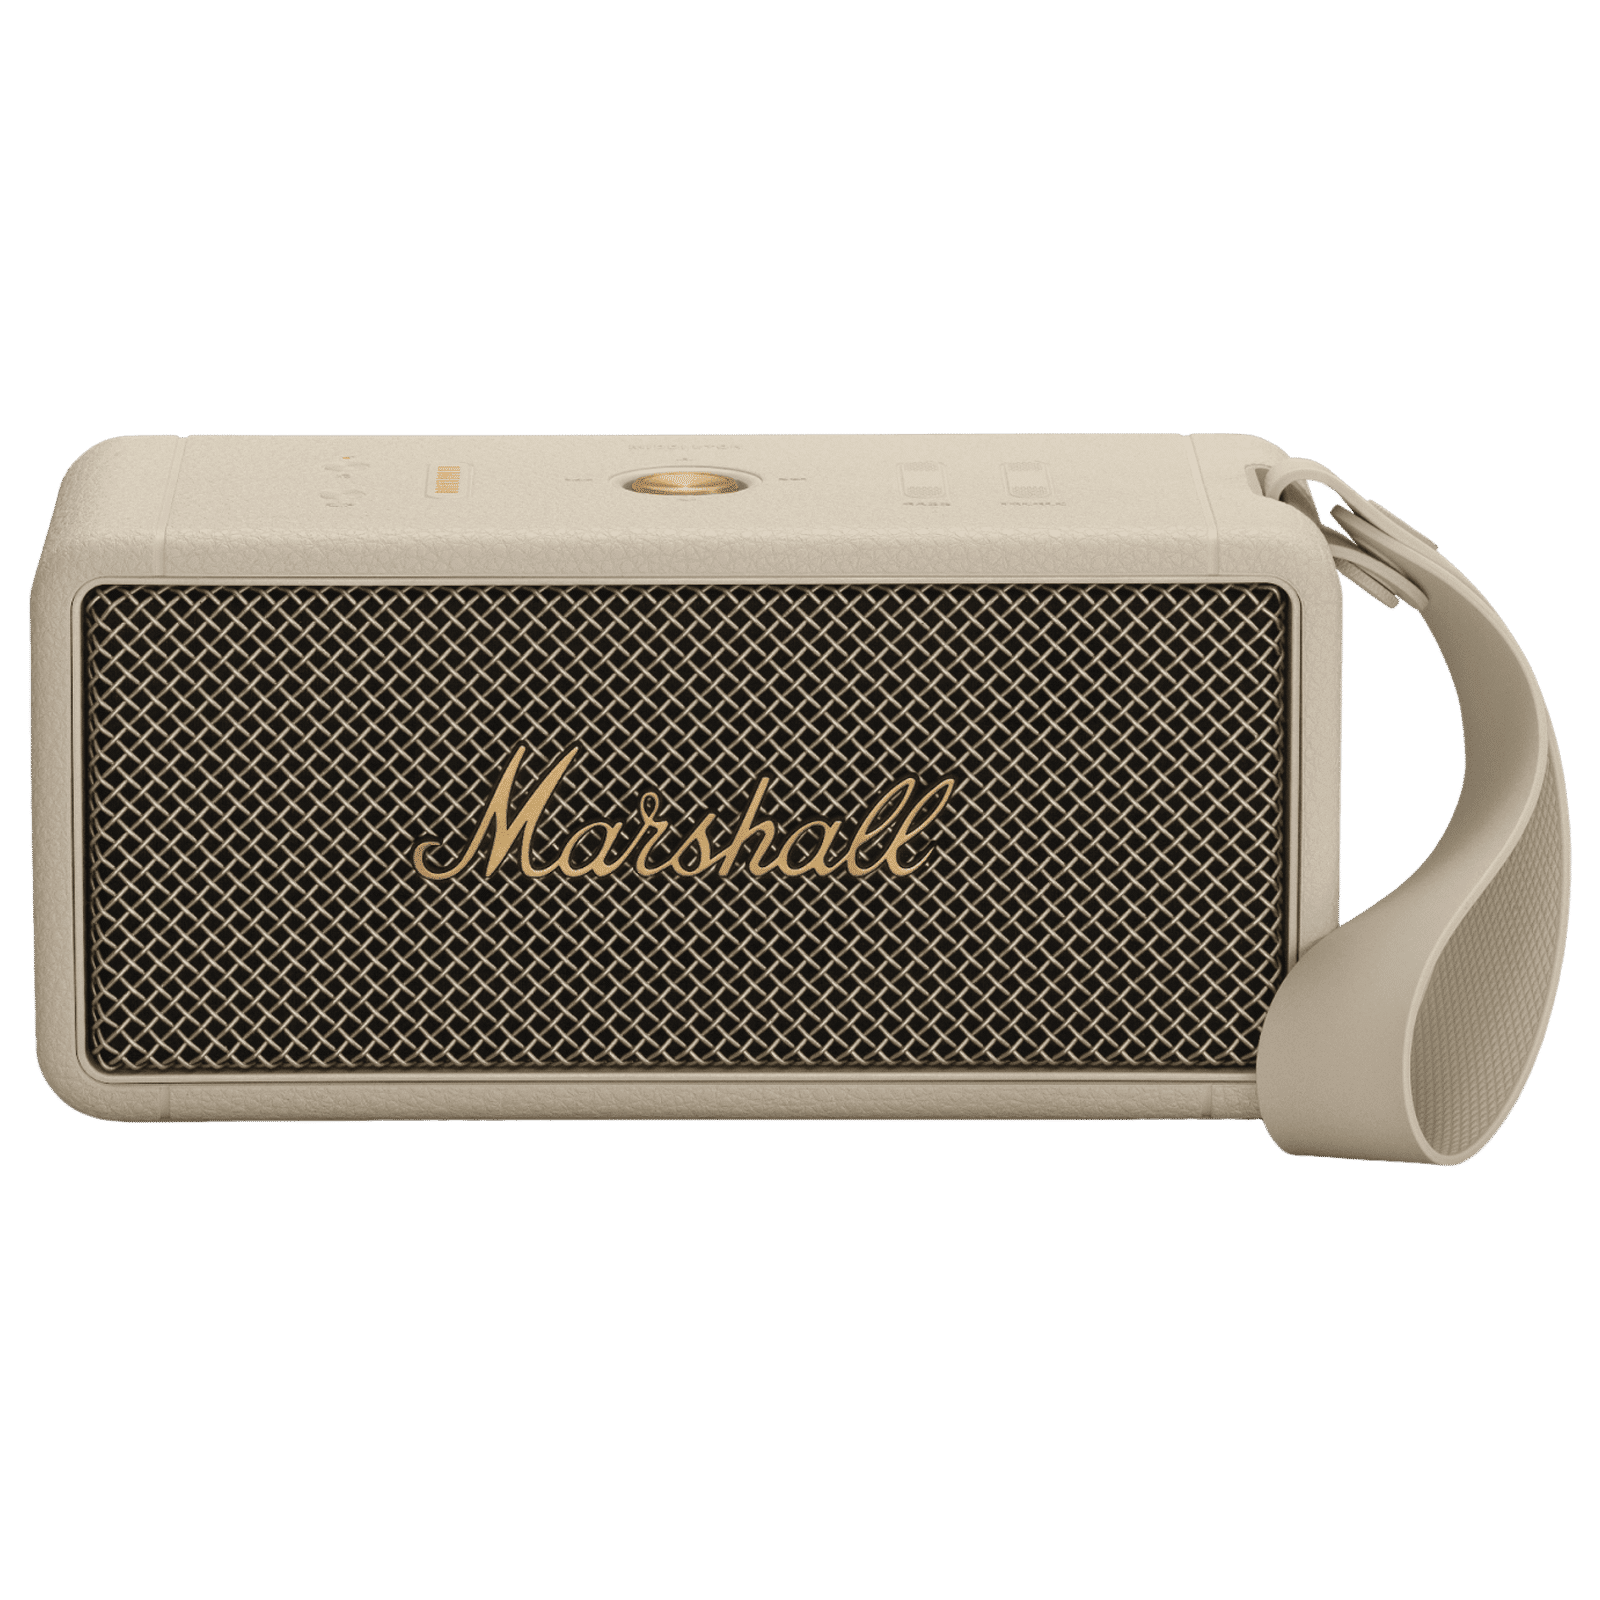 Buy Marshall Middleton Portable Bluetooth Plus Cream) Croma Stereo Online Hours Speaker - (IP67 Water 20 Channel, Playtime, Resistant